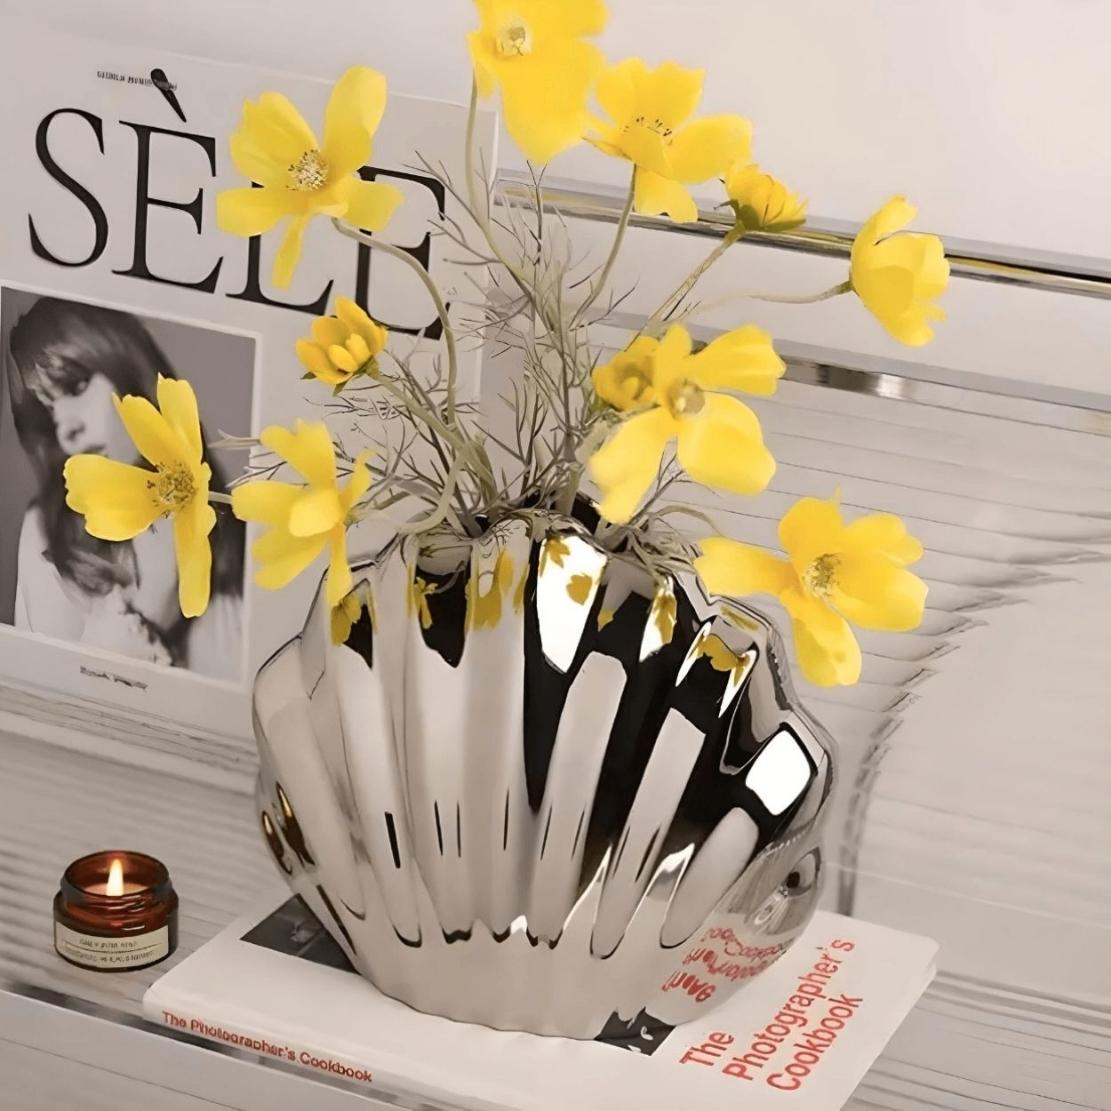 Silver glazed shell vase with yellow flowers